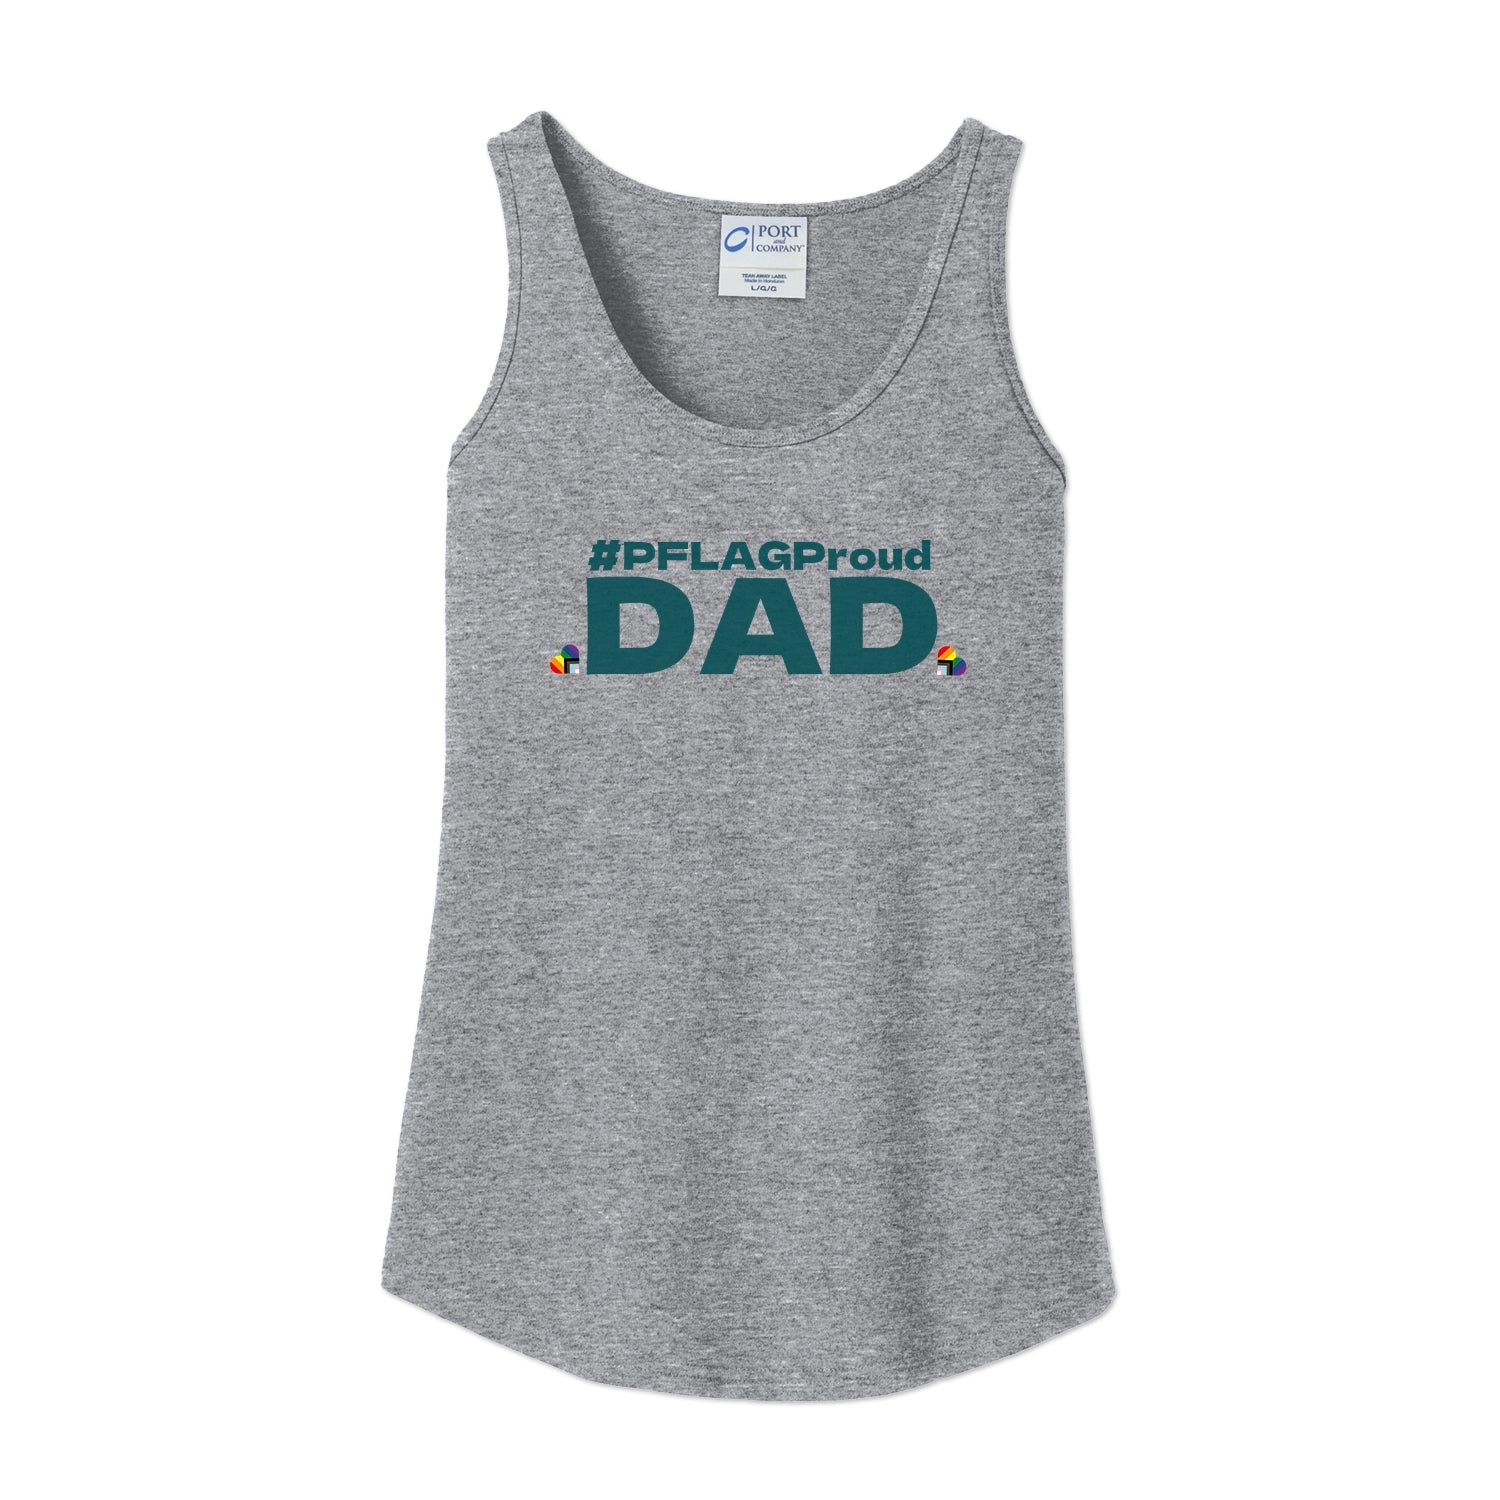 #PFLAGProud Dad - Fitted Cut Tank Top